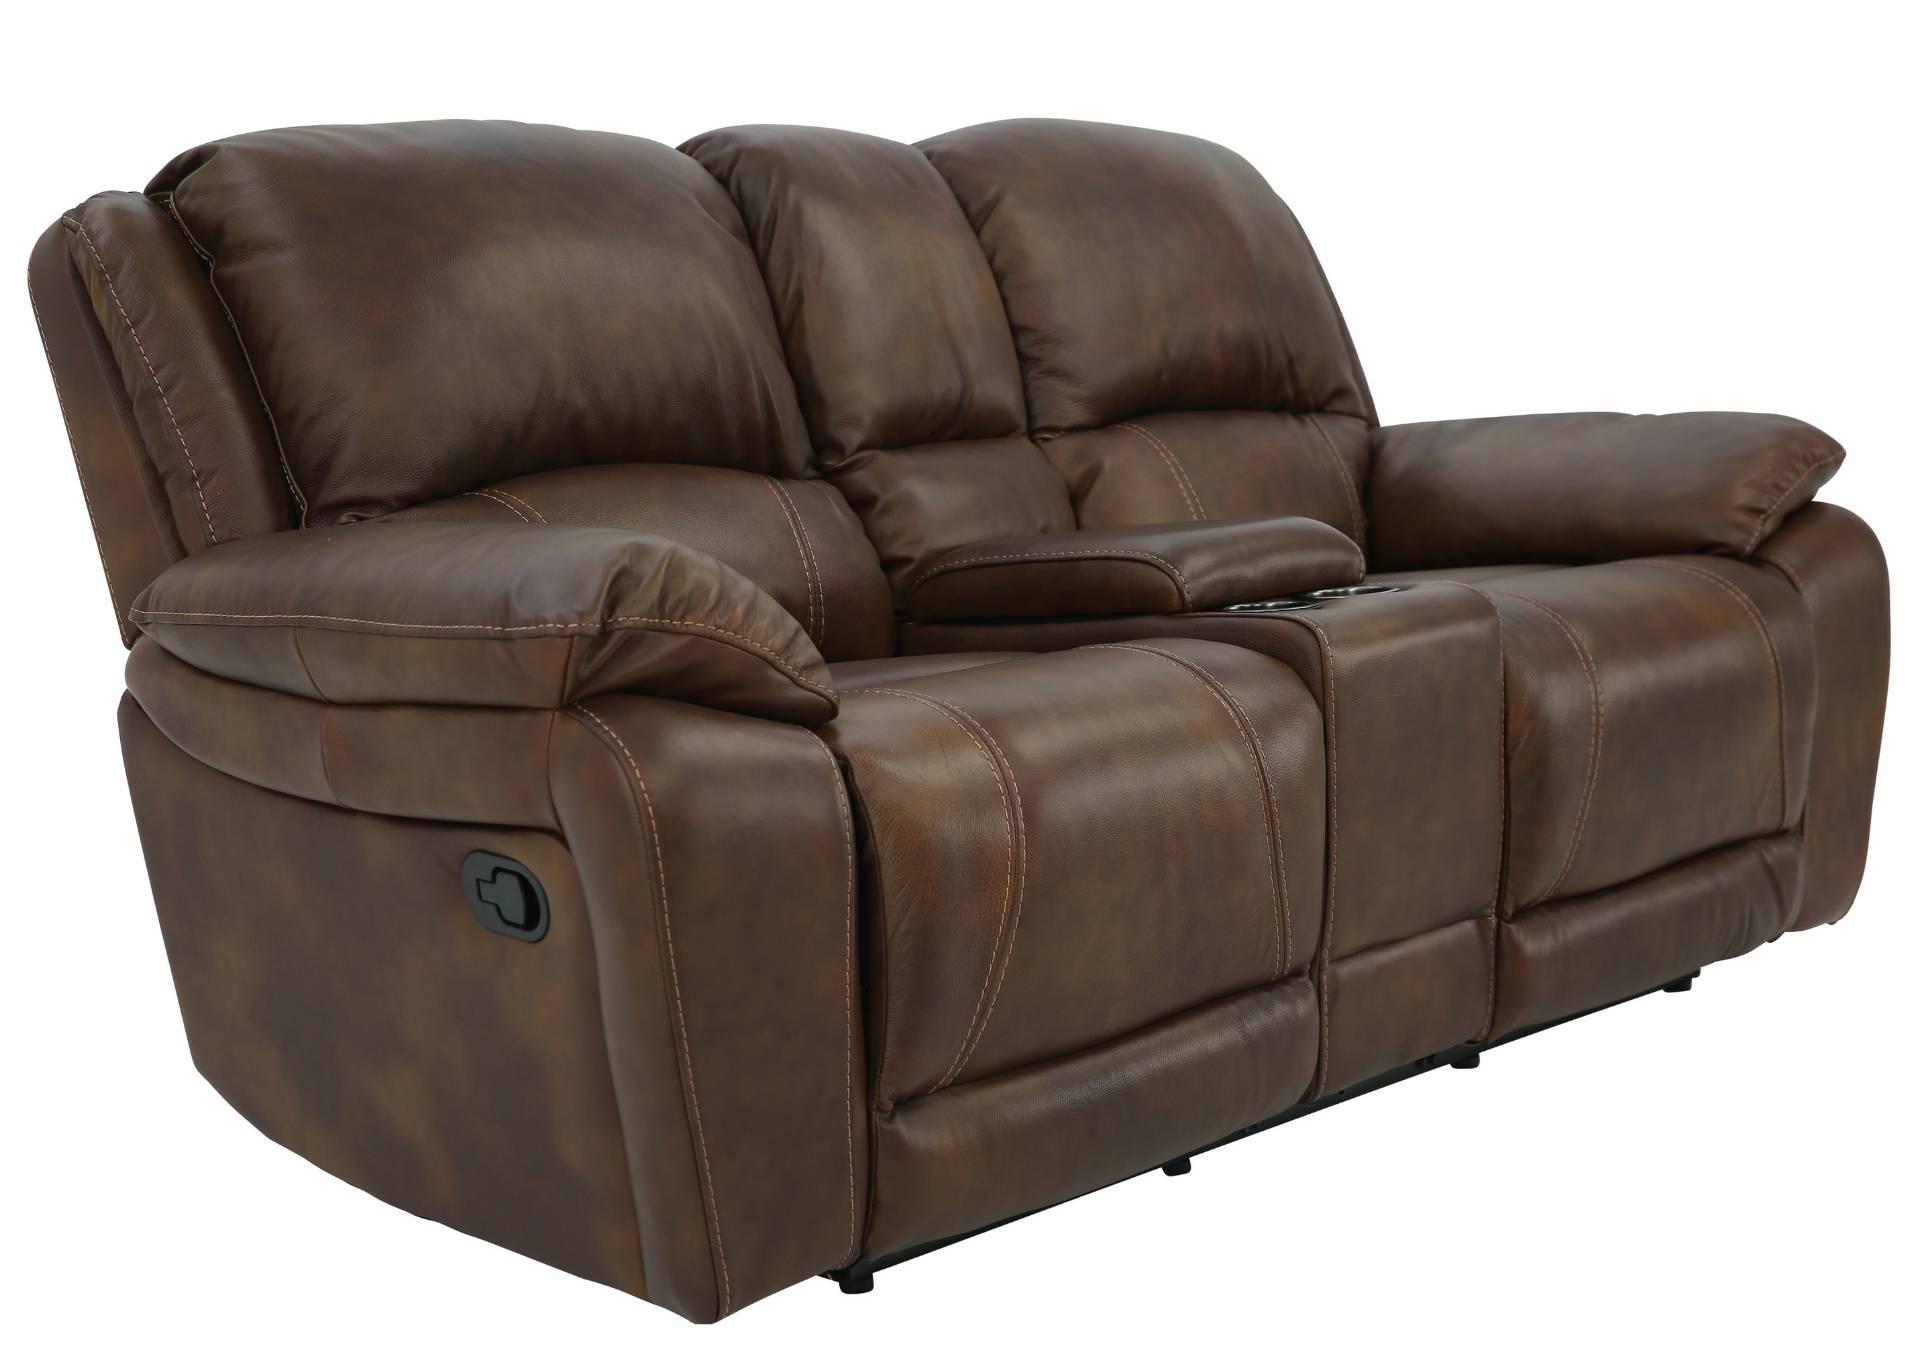 Crenshaw Sienna Leather Reclining, Leather Recliner Loveseat